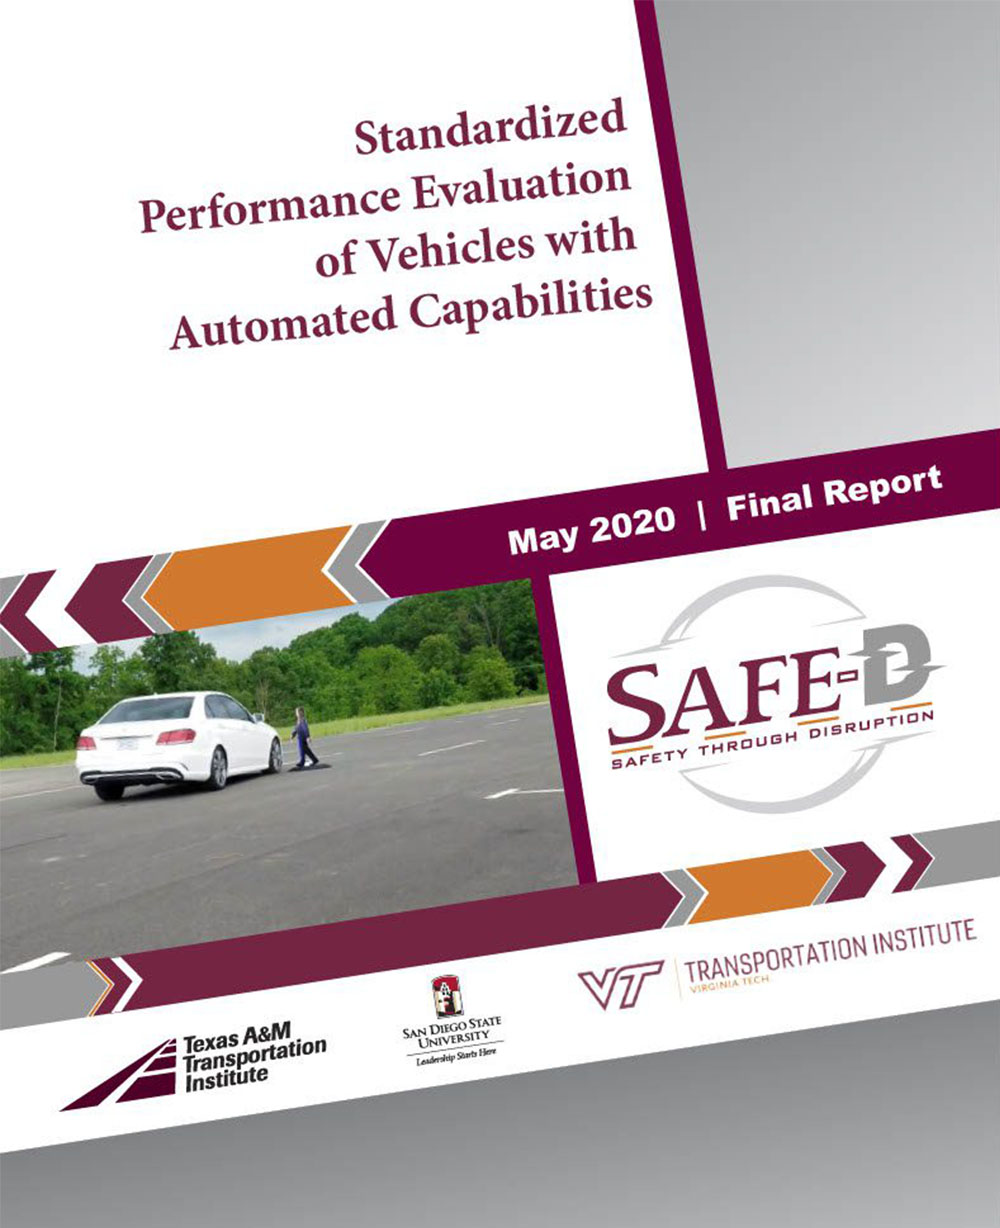 VTTI-00-020 Standardized Performance Evaluation of Vehicles with Automated Capabilities